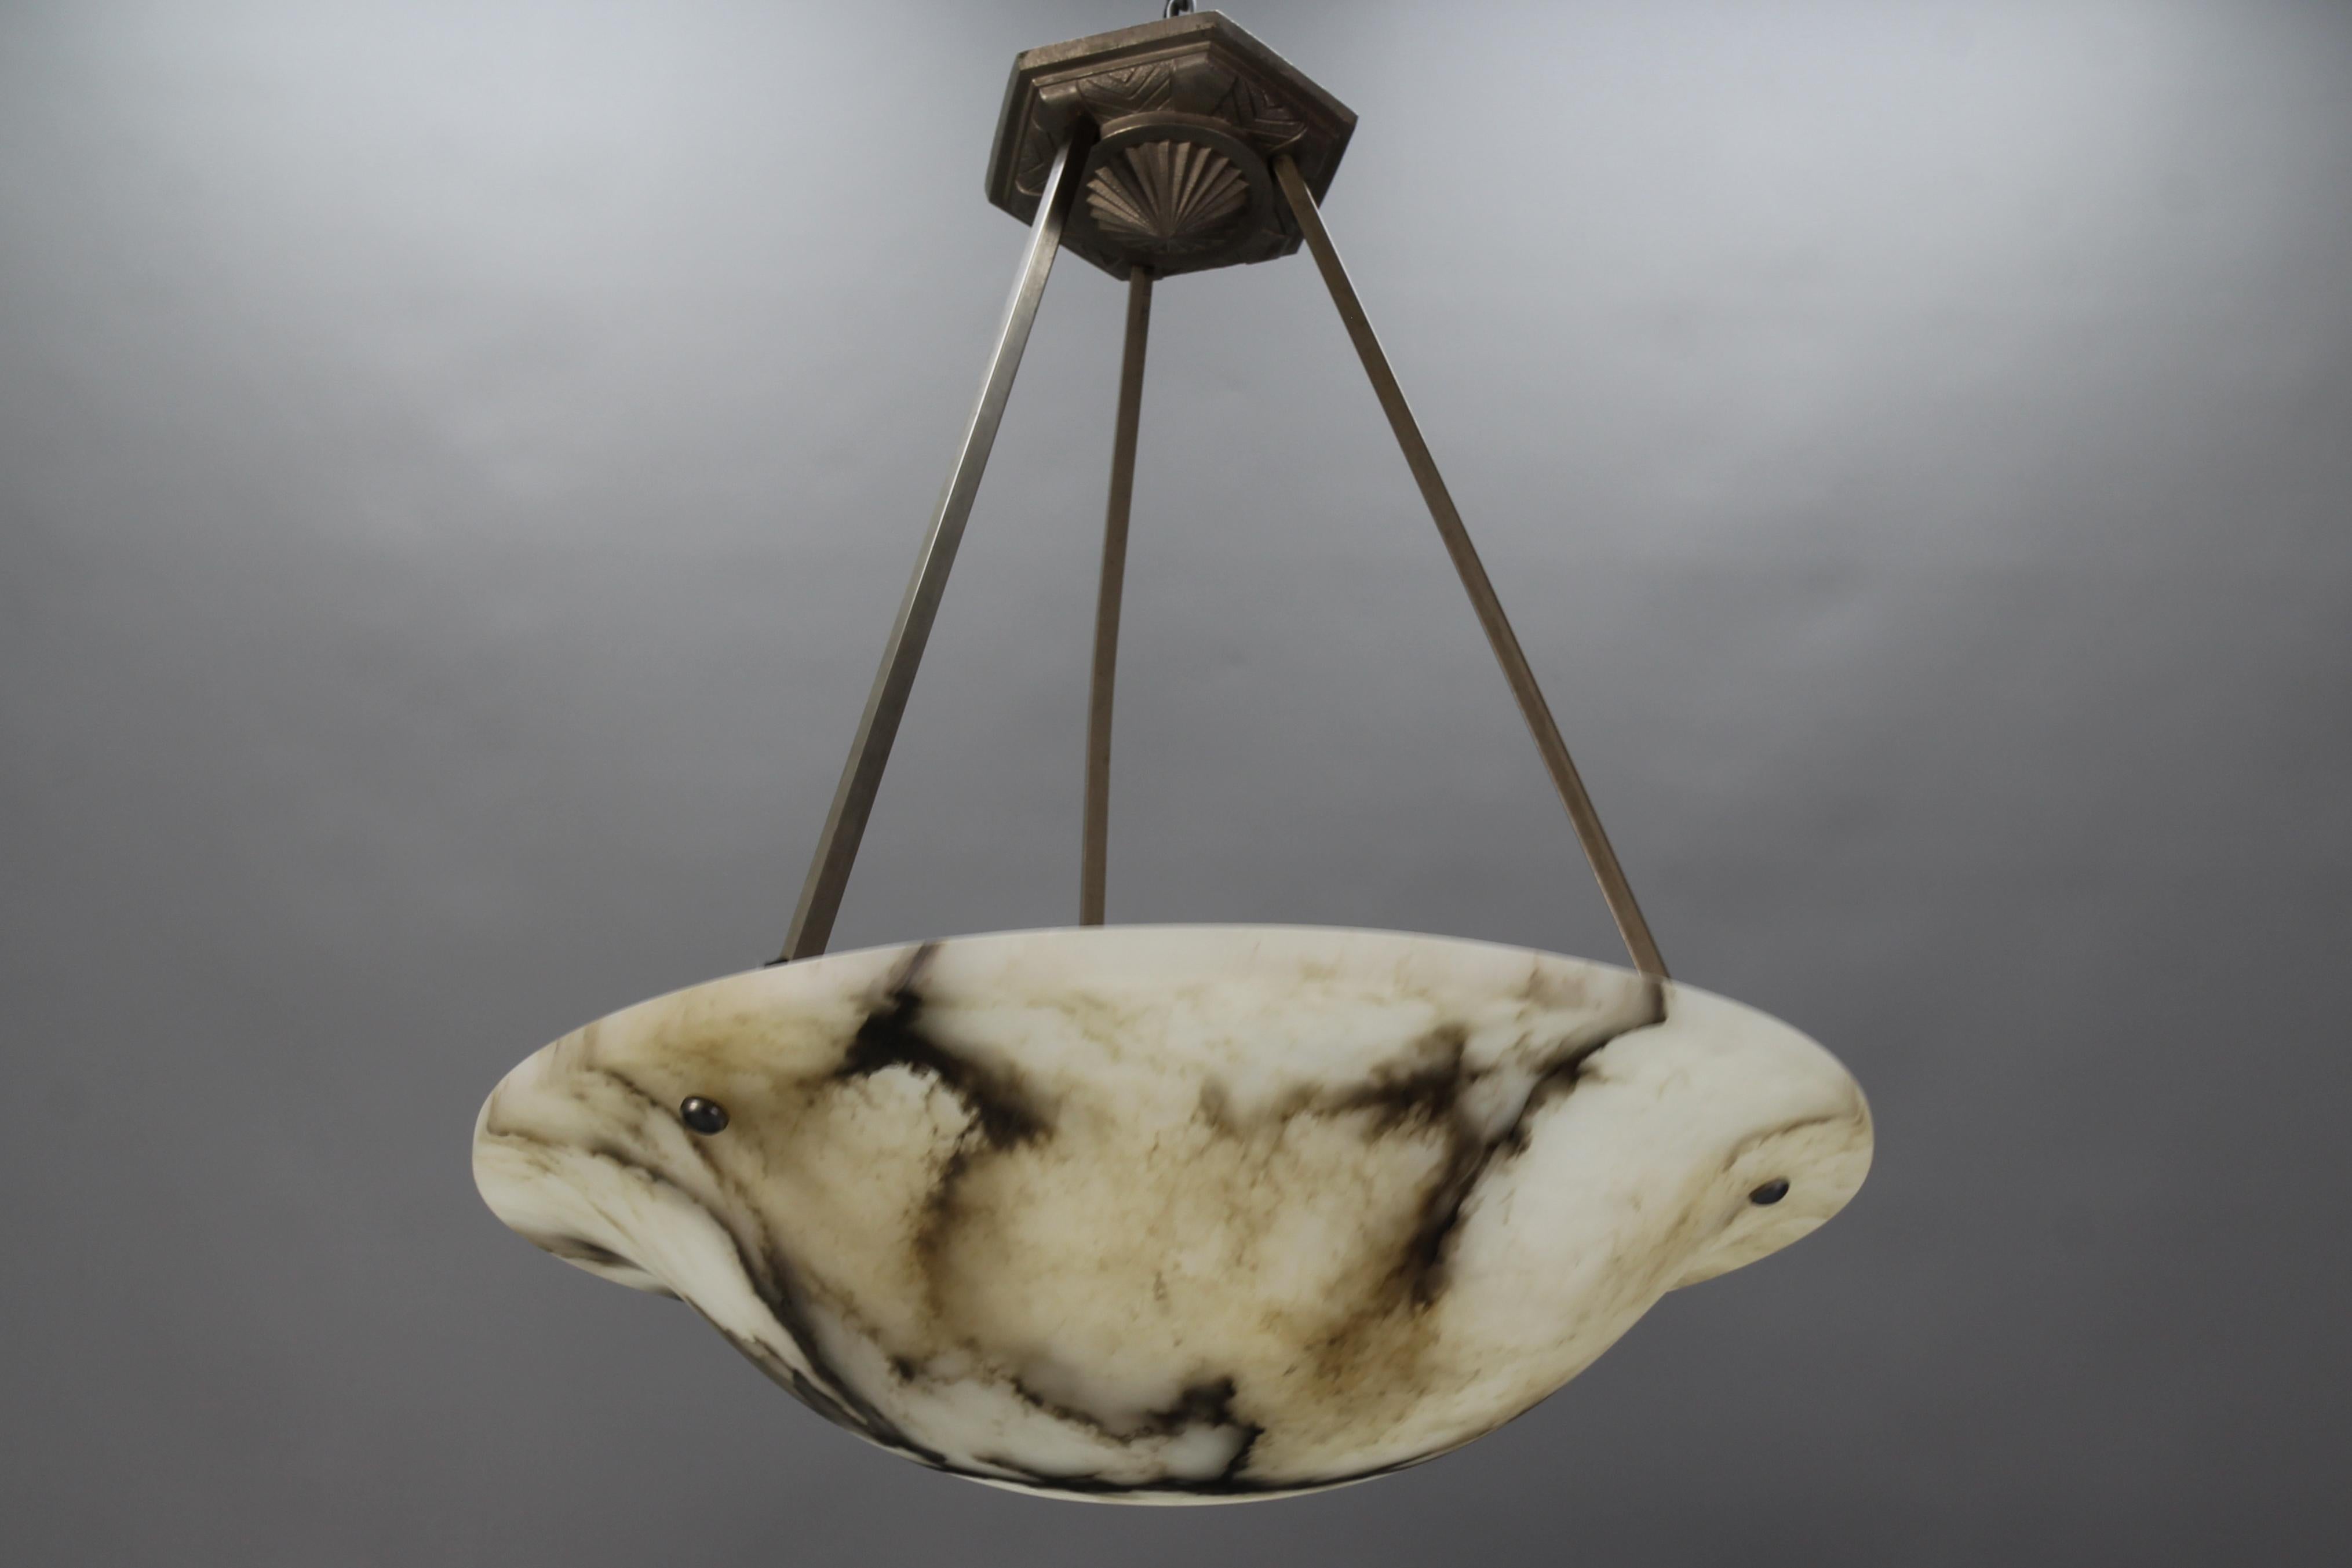 Art Deco white and black veined alabaster pendant light fixture.
A wonderful alabaster pendant ceiling light fixture from circa the 1930s. Beautifully veined one-piece white alabaster bowl suspended by the chromed brass fixture and a decorative